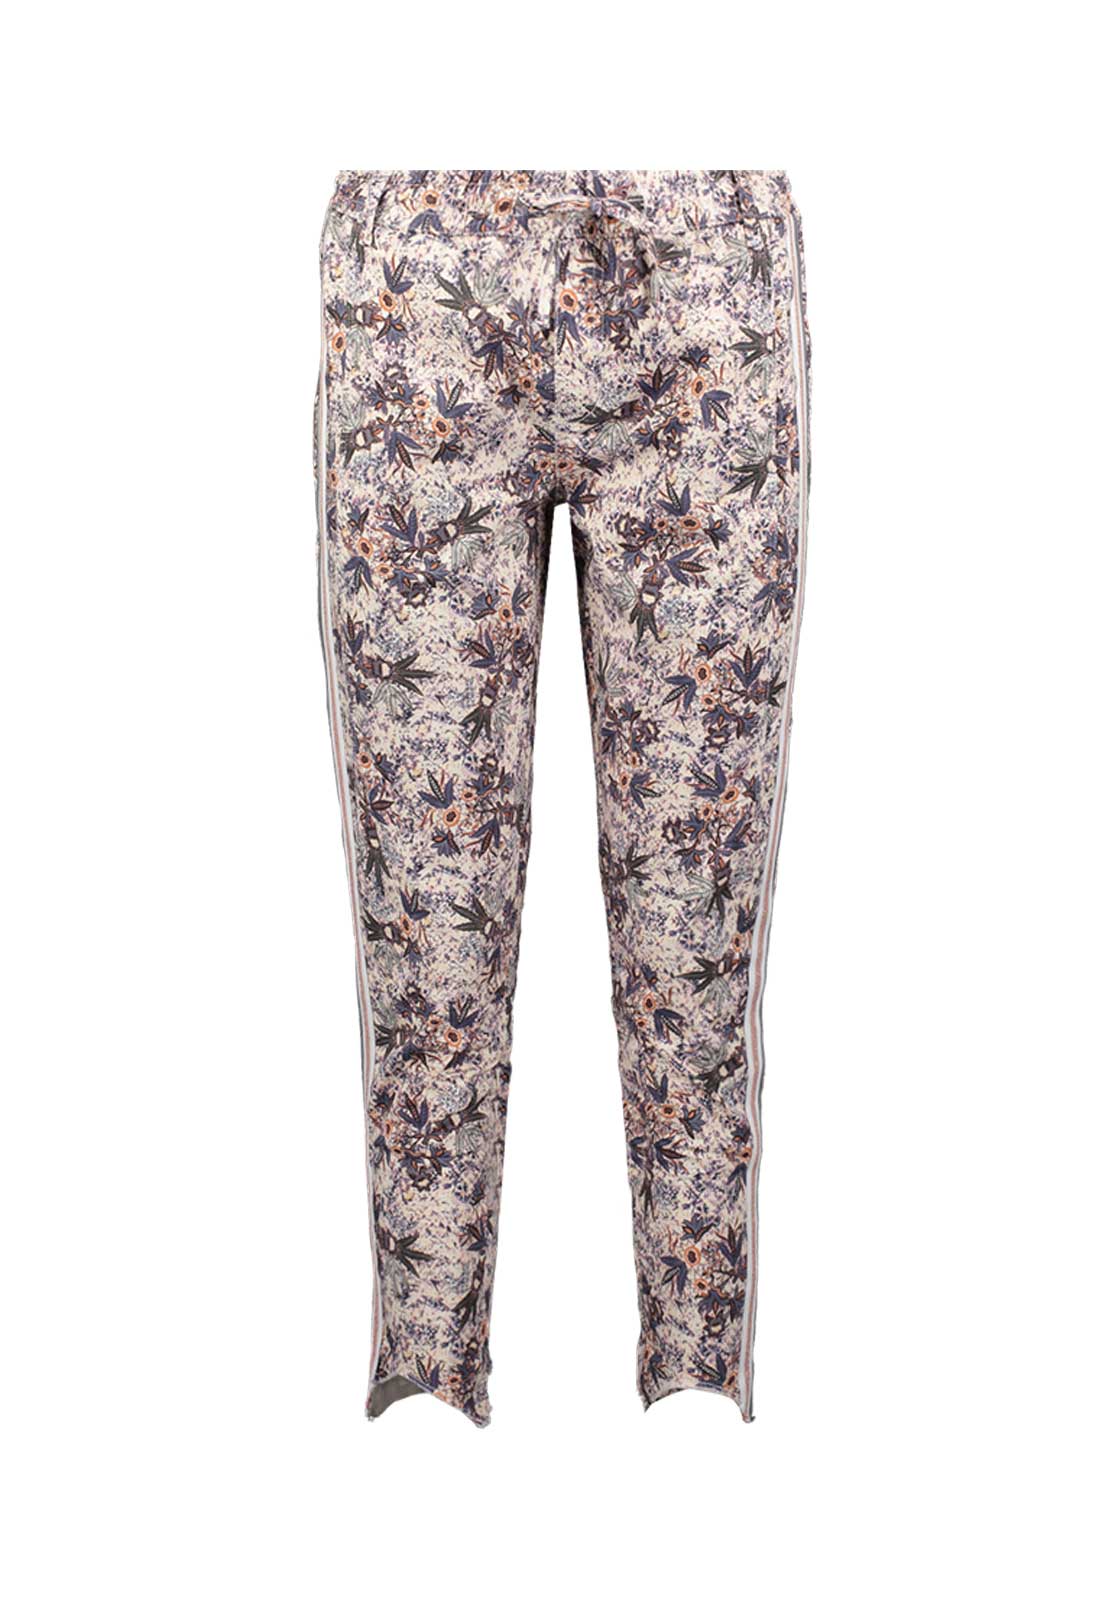 SuZa 8303-PRINTED PANTS FLOWER SUMMER BREEZE